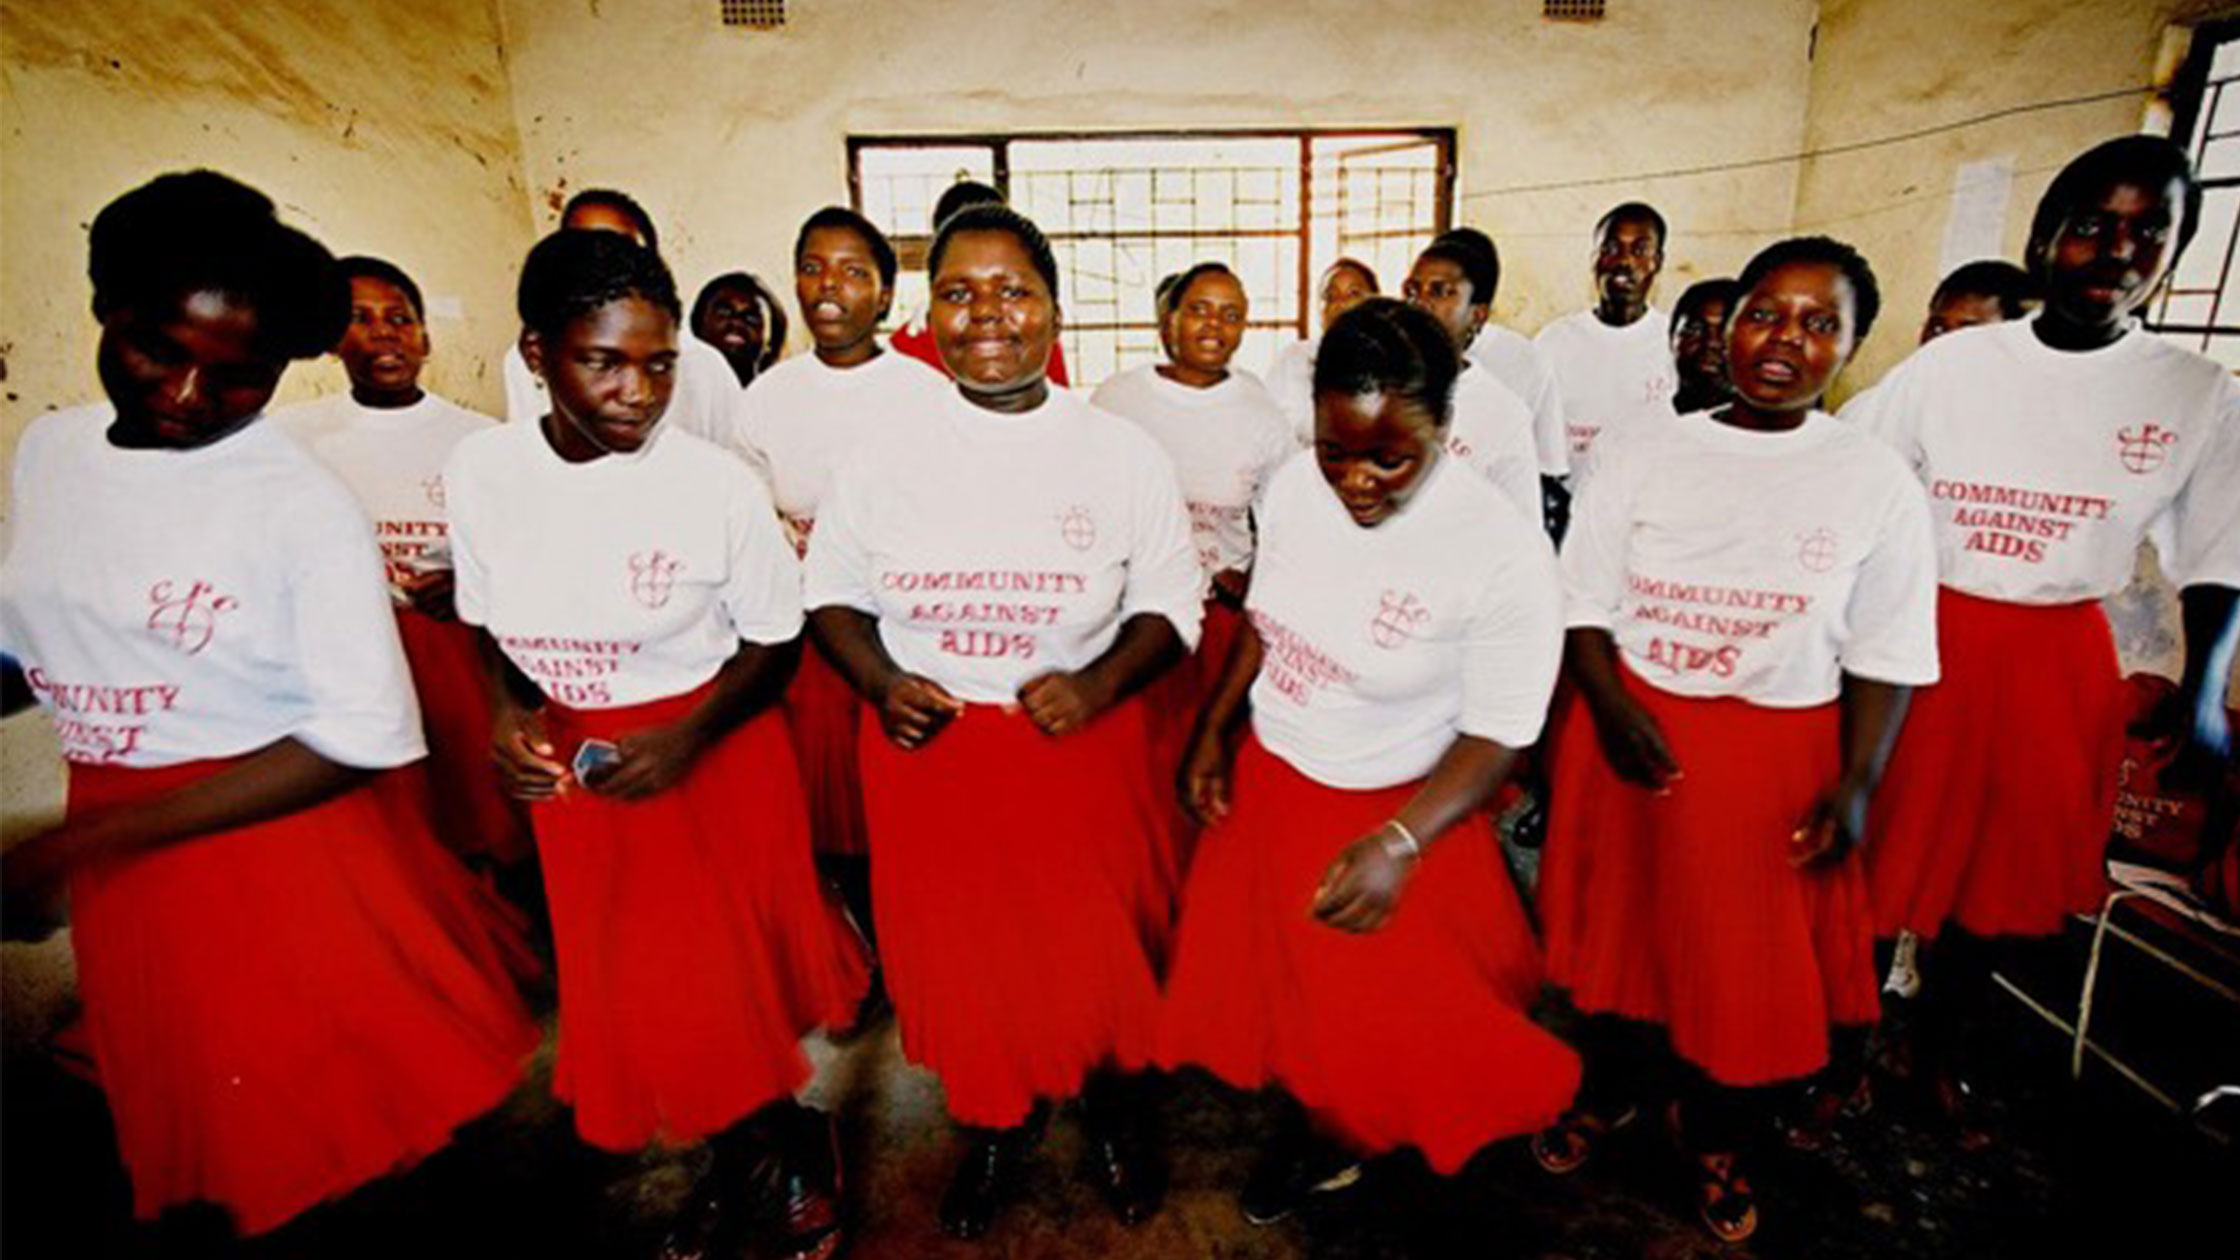 South African women getting HIV education